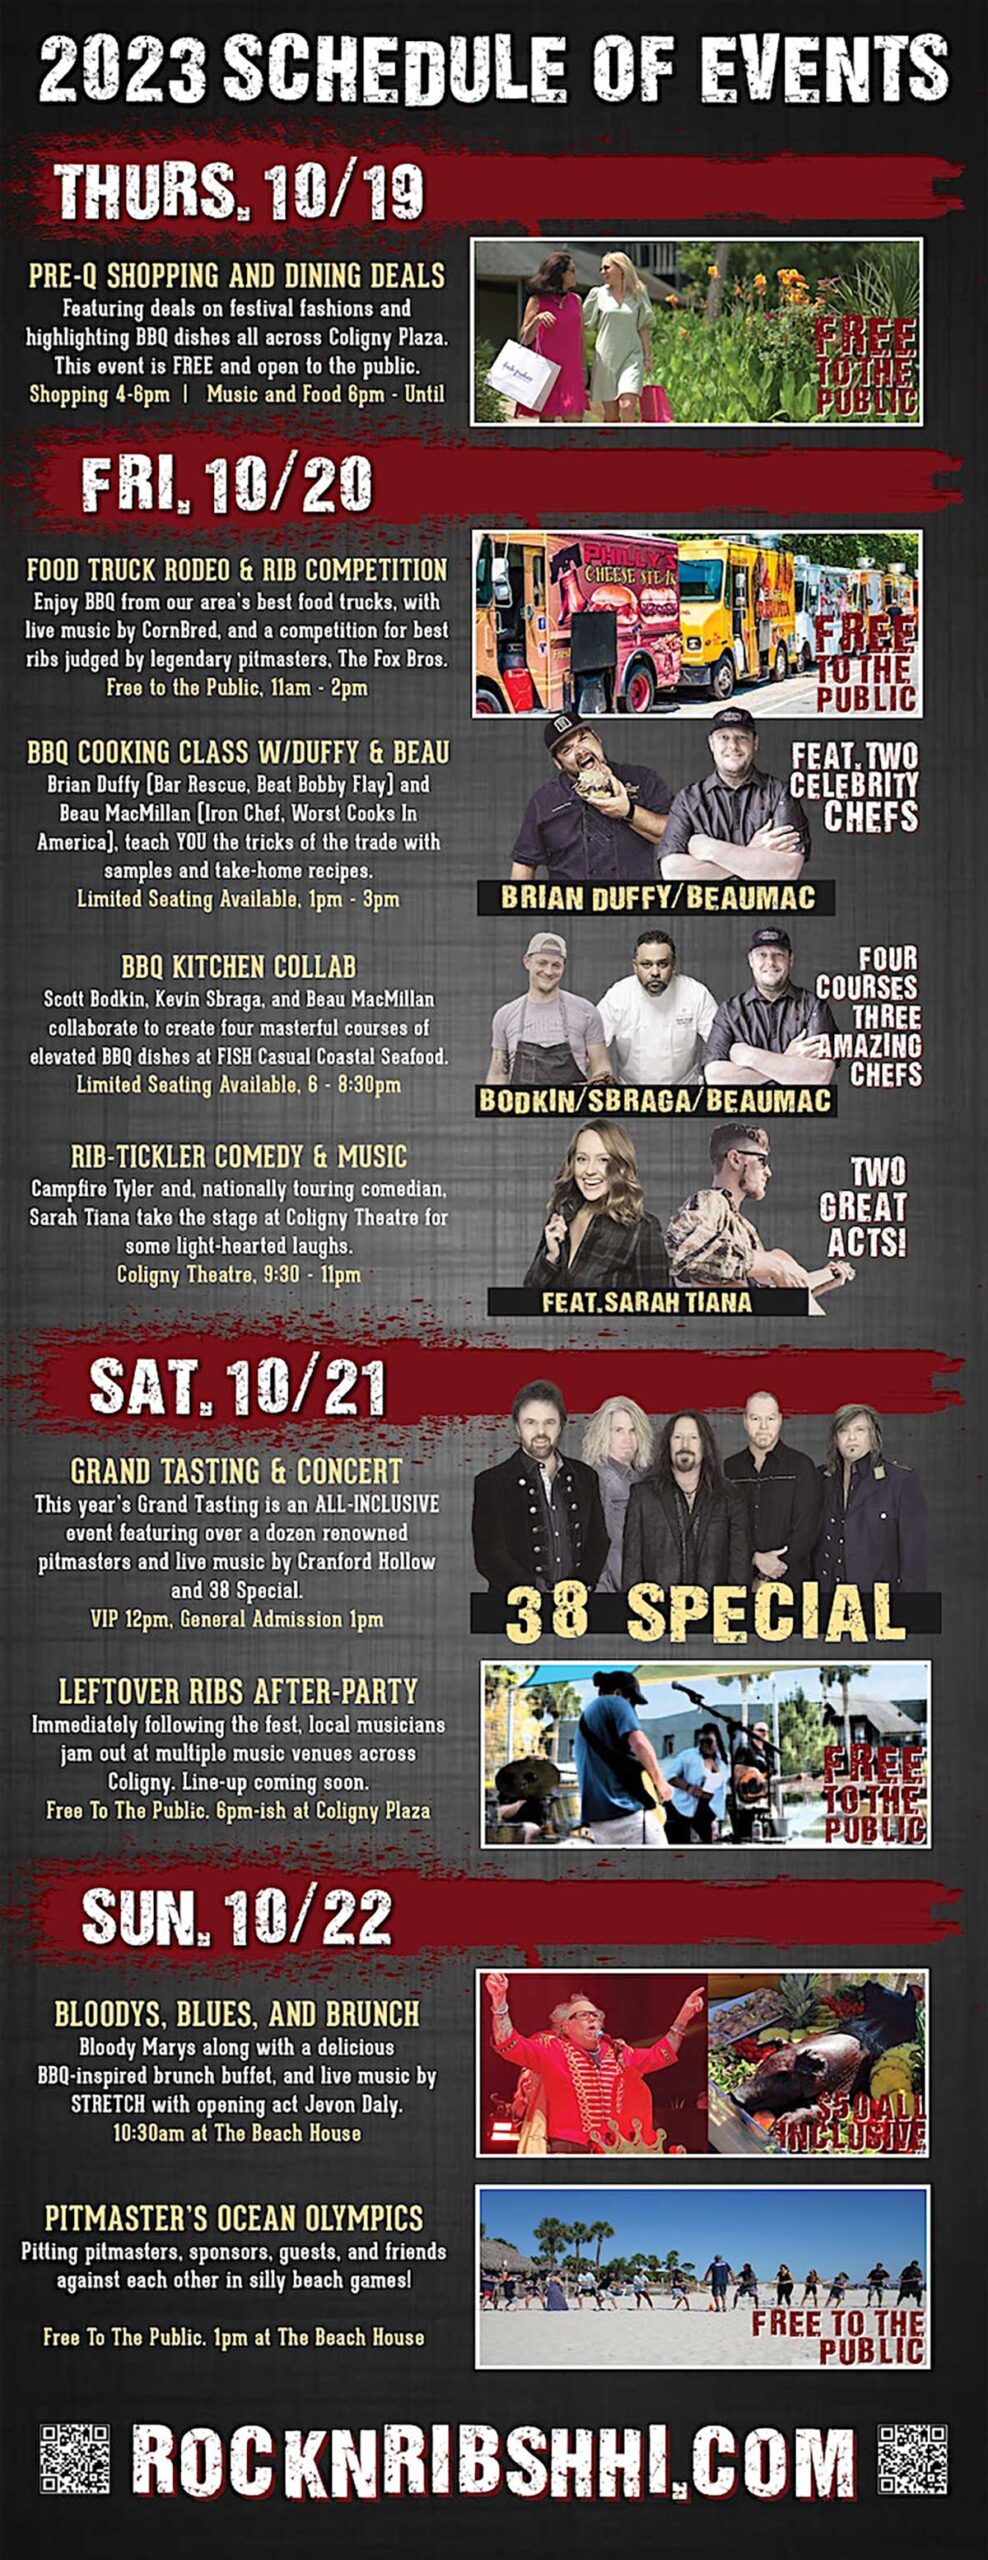 Graphic showing the events for each day of the Rock N Ribs festival on Hilton Head, SC.